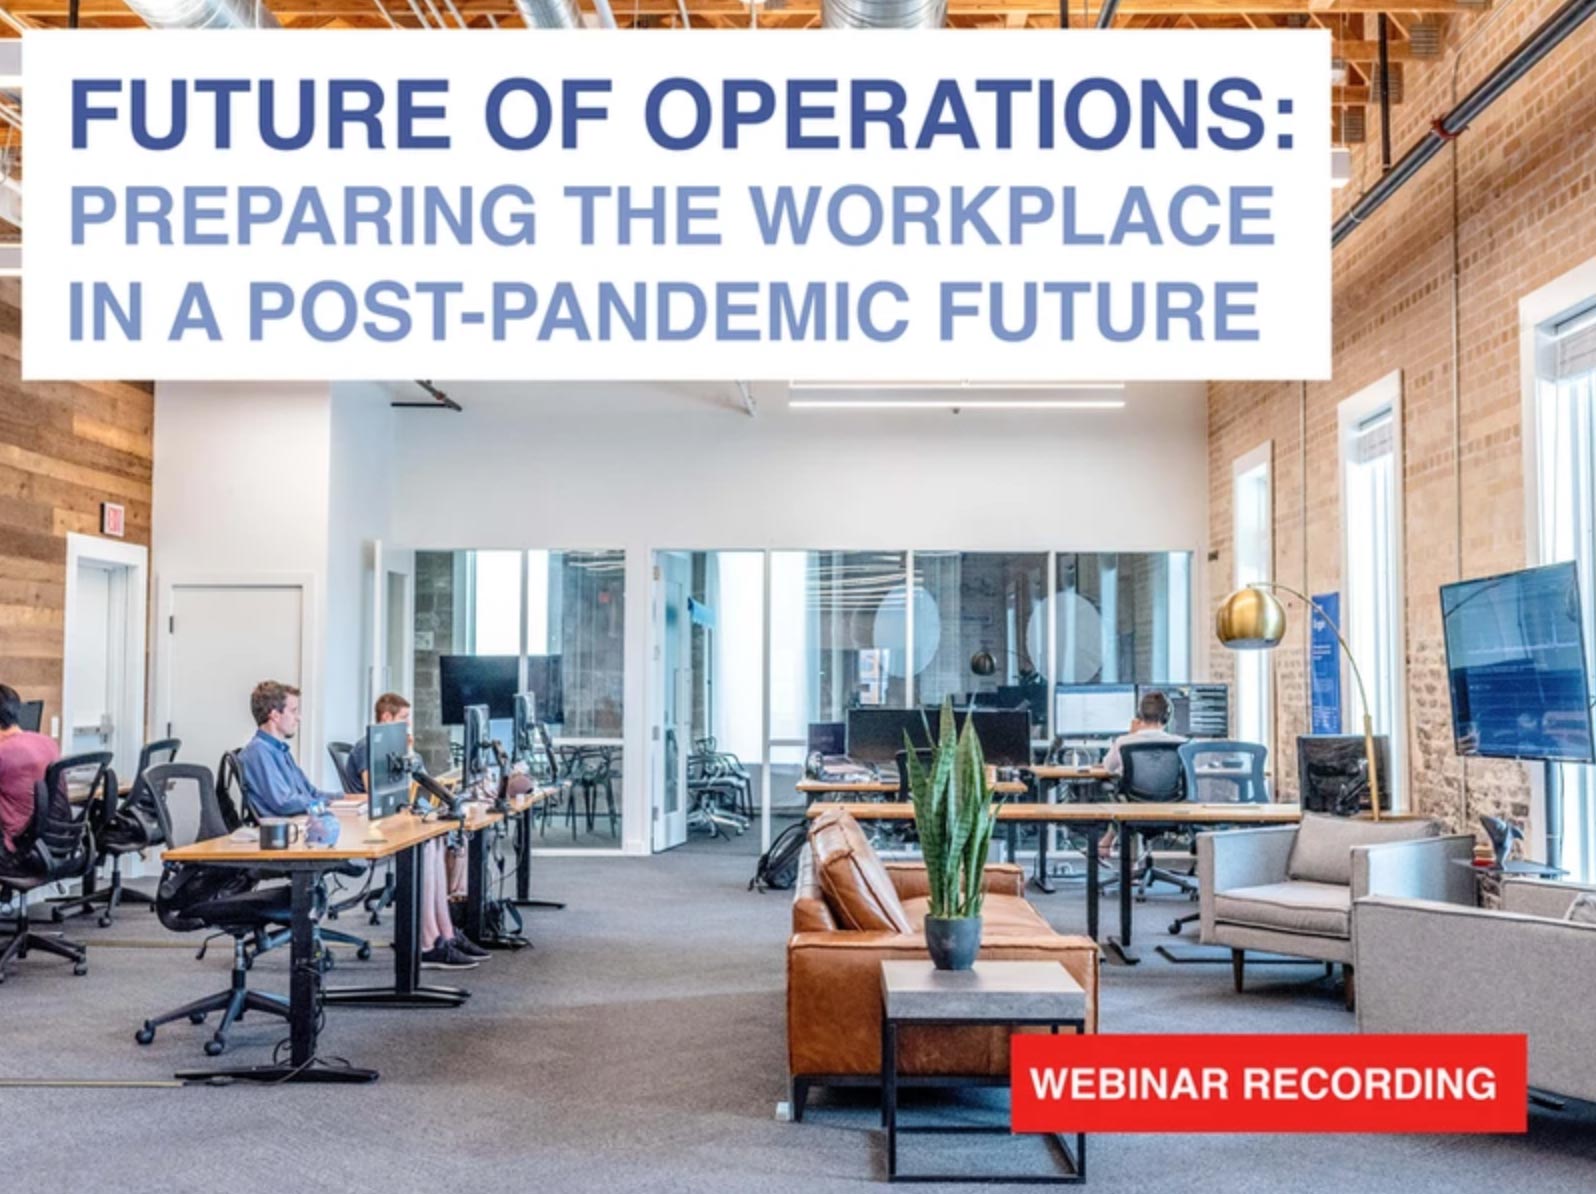 Future of Operations: Preparing the Workplace in a Post-Pandemic Future